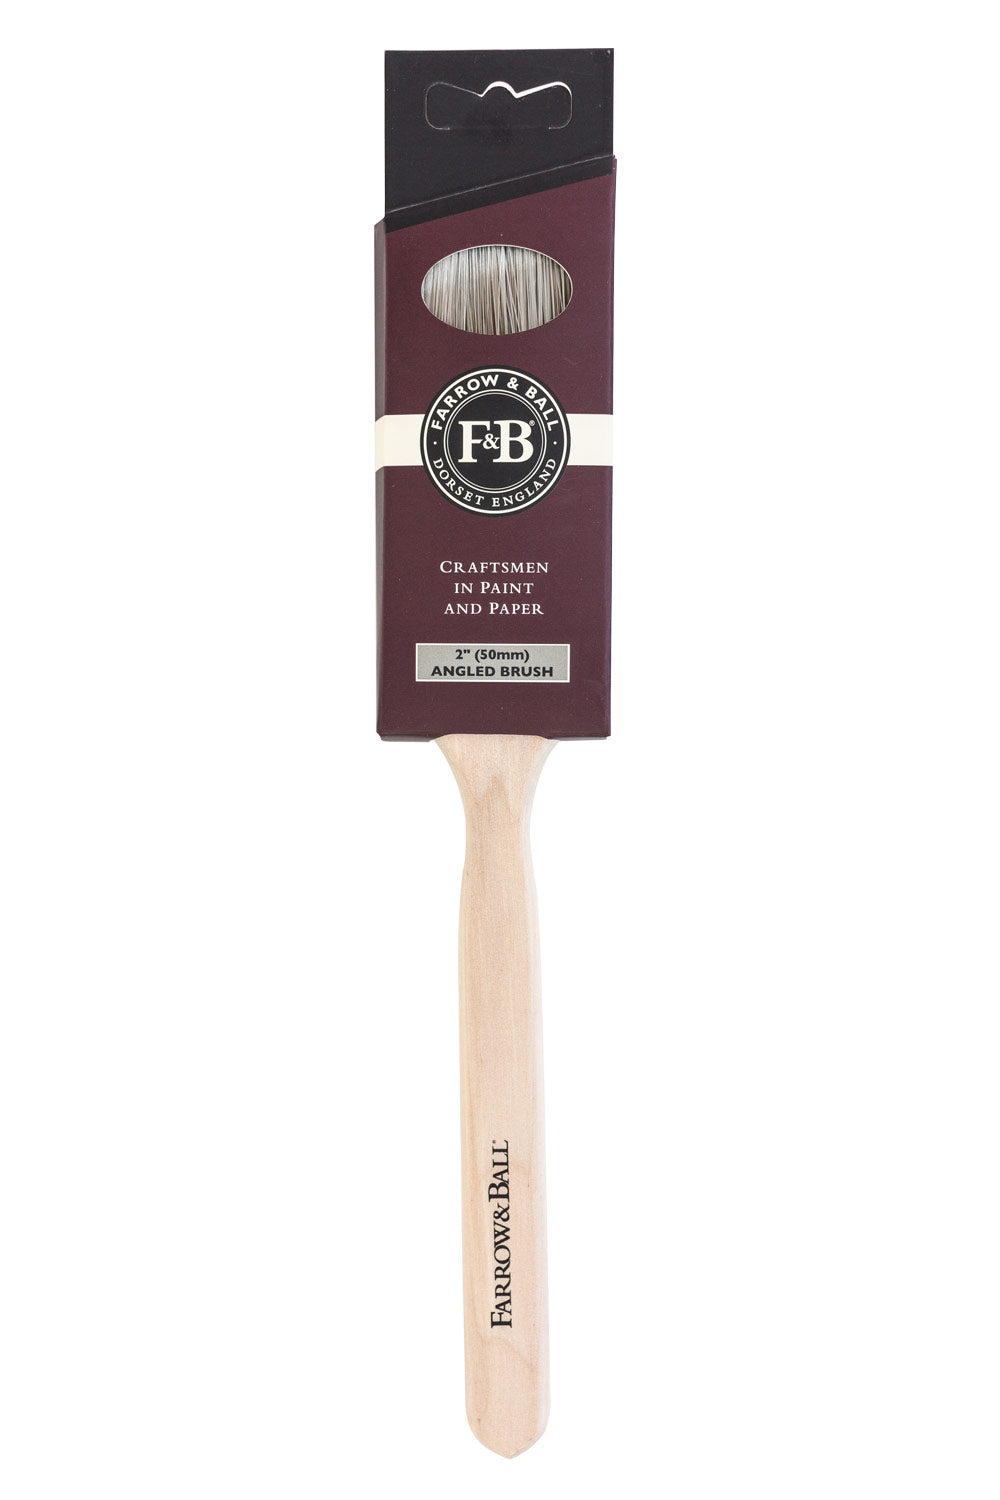 Farrow & Ball 2" Angled Brush-Exeter Paint Stores